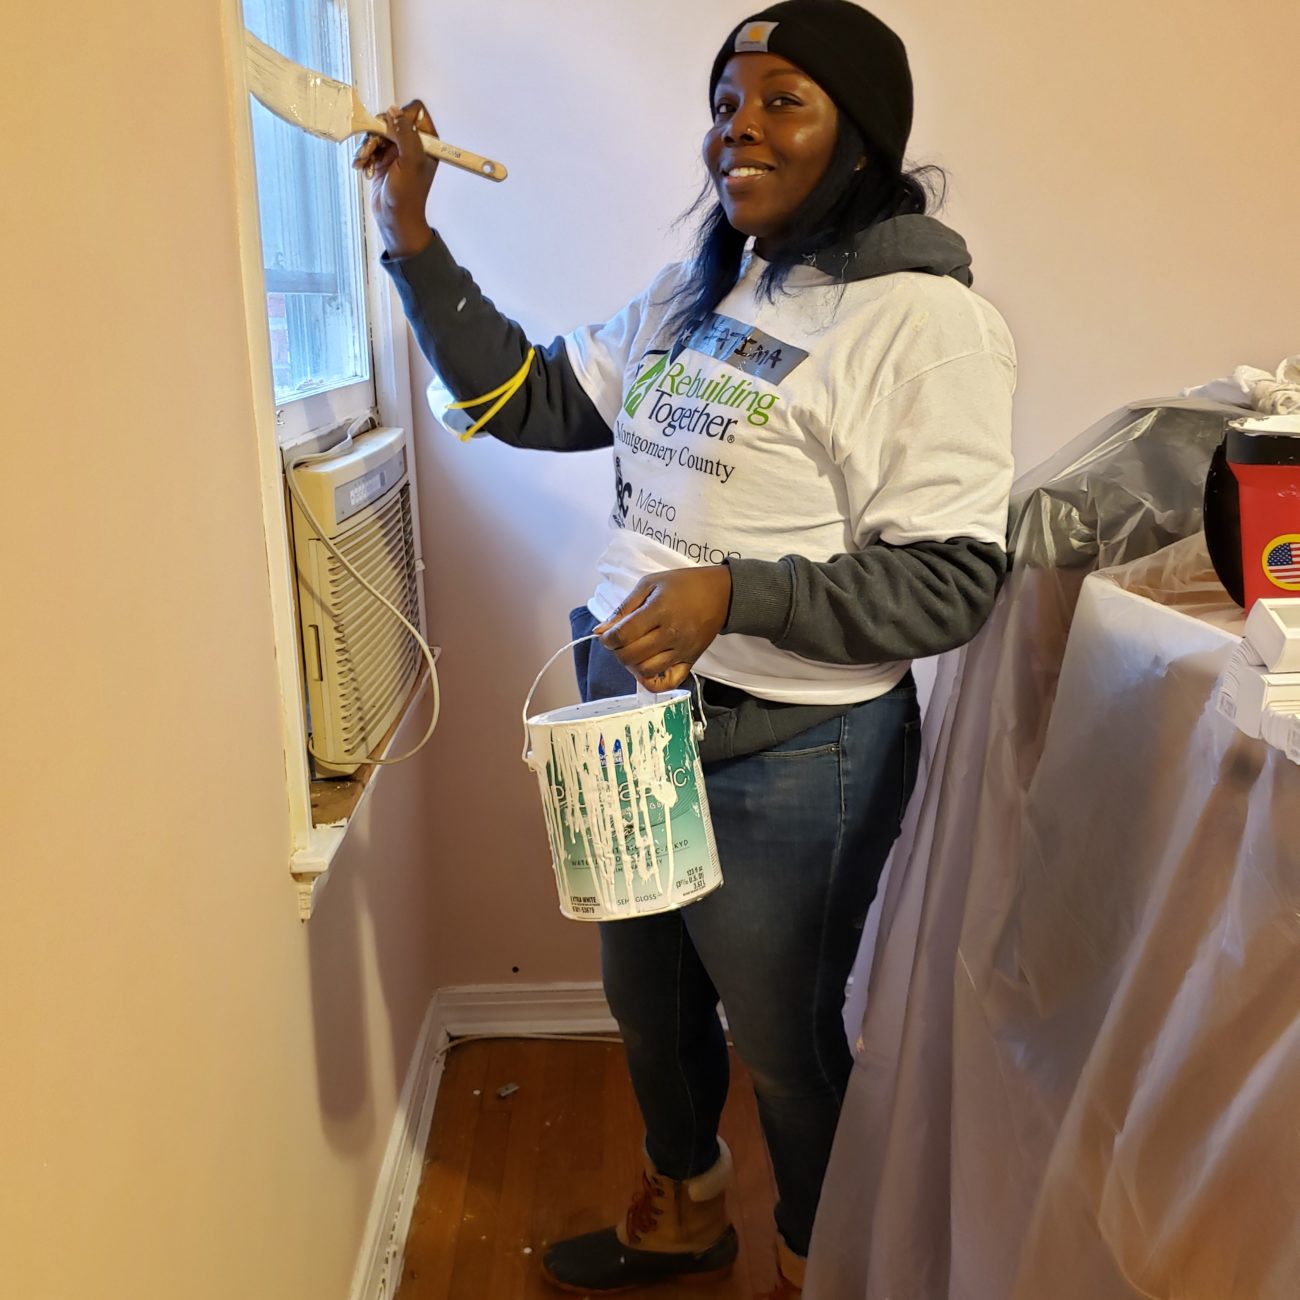 Celebrating Women In Construction Week 2019 by Particiating in SheBuilds